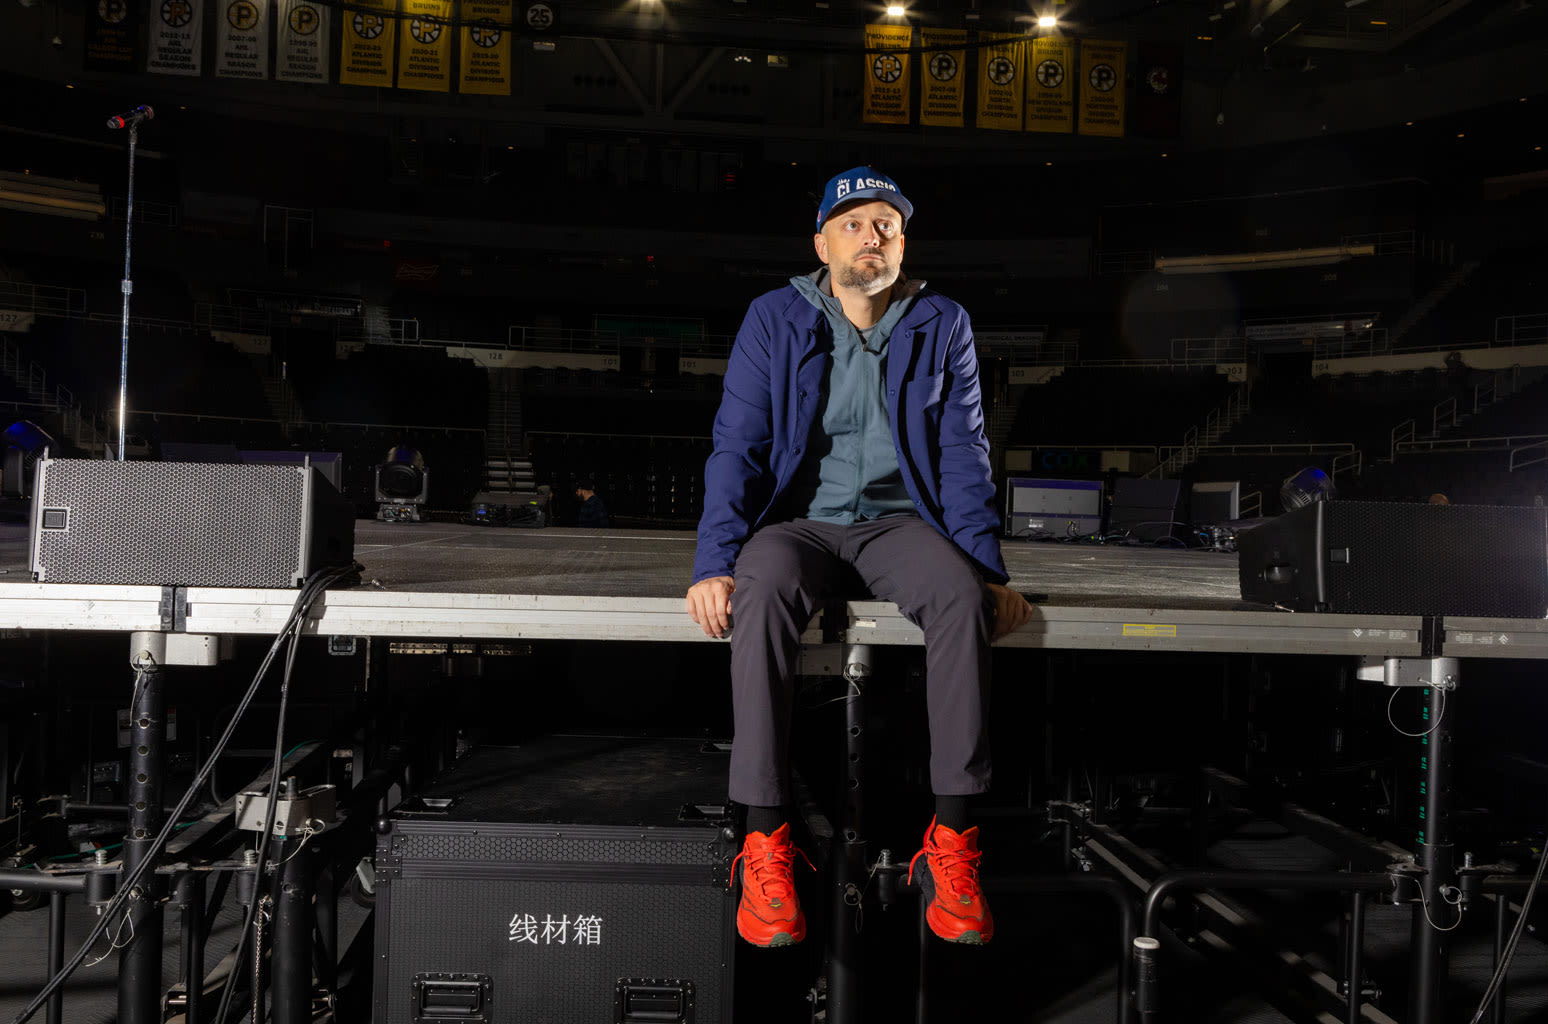 ...Nate Bargatze on Breaking Arena Records, Going Viral From ‘SNL’ & Staying Non-Political: ‘You Don’t Need Me to Add to That...